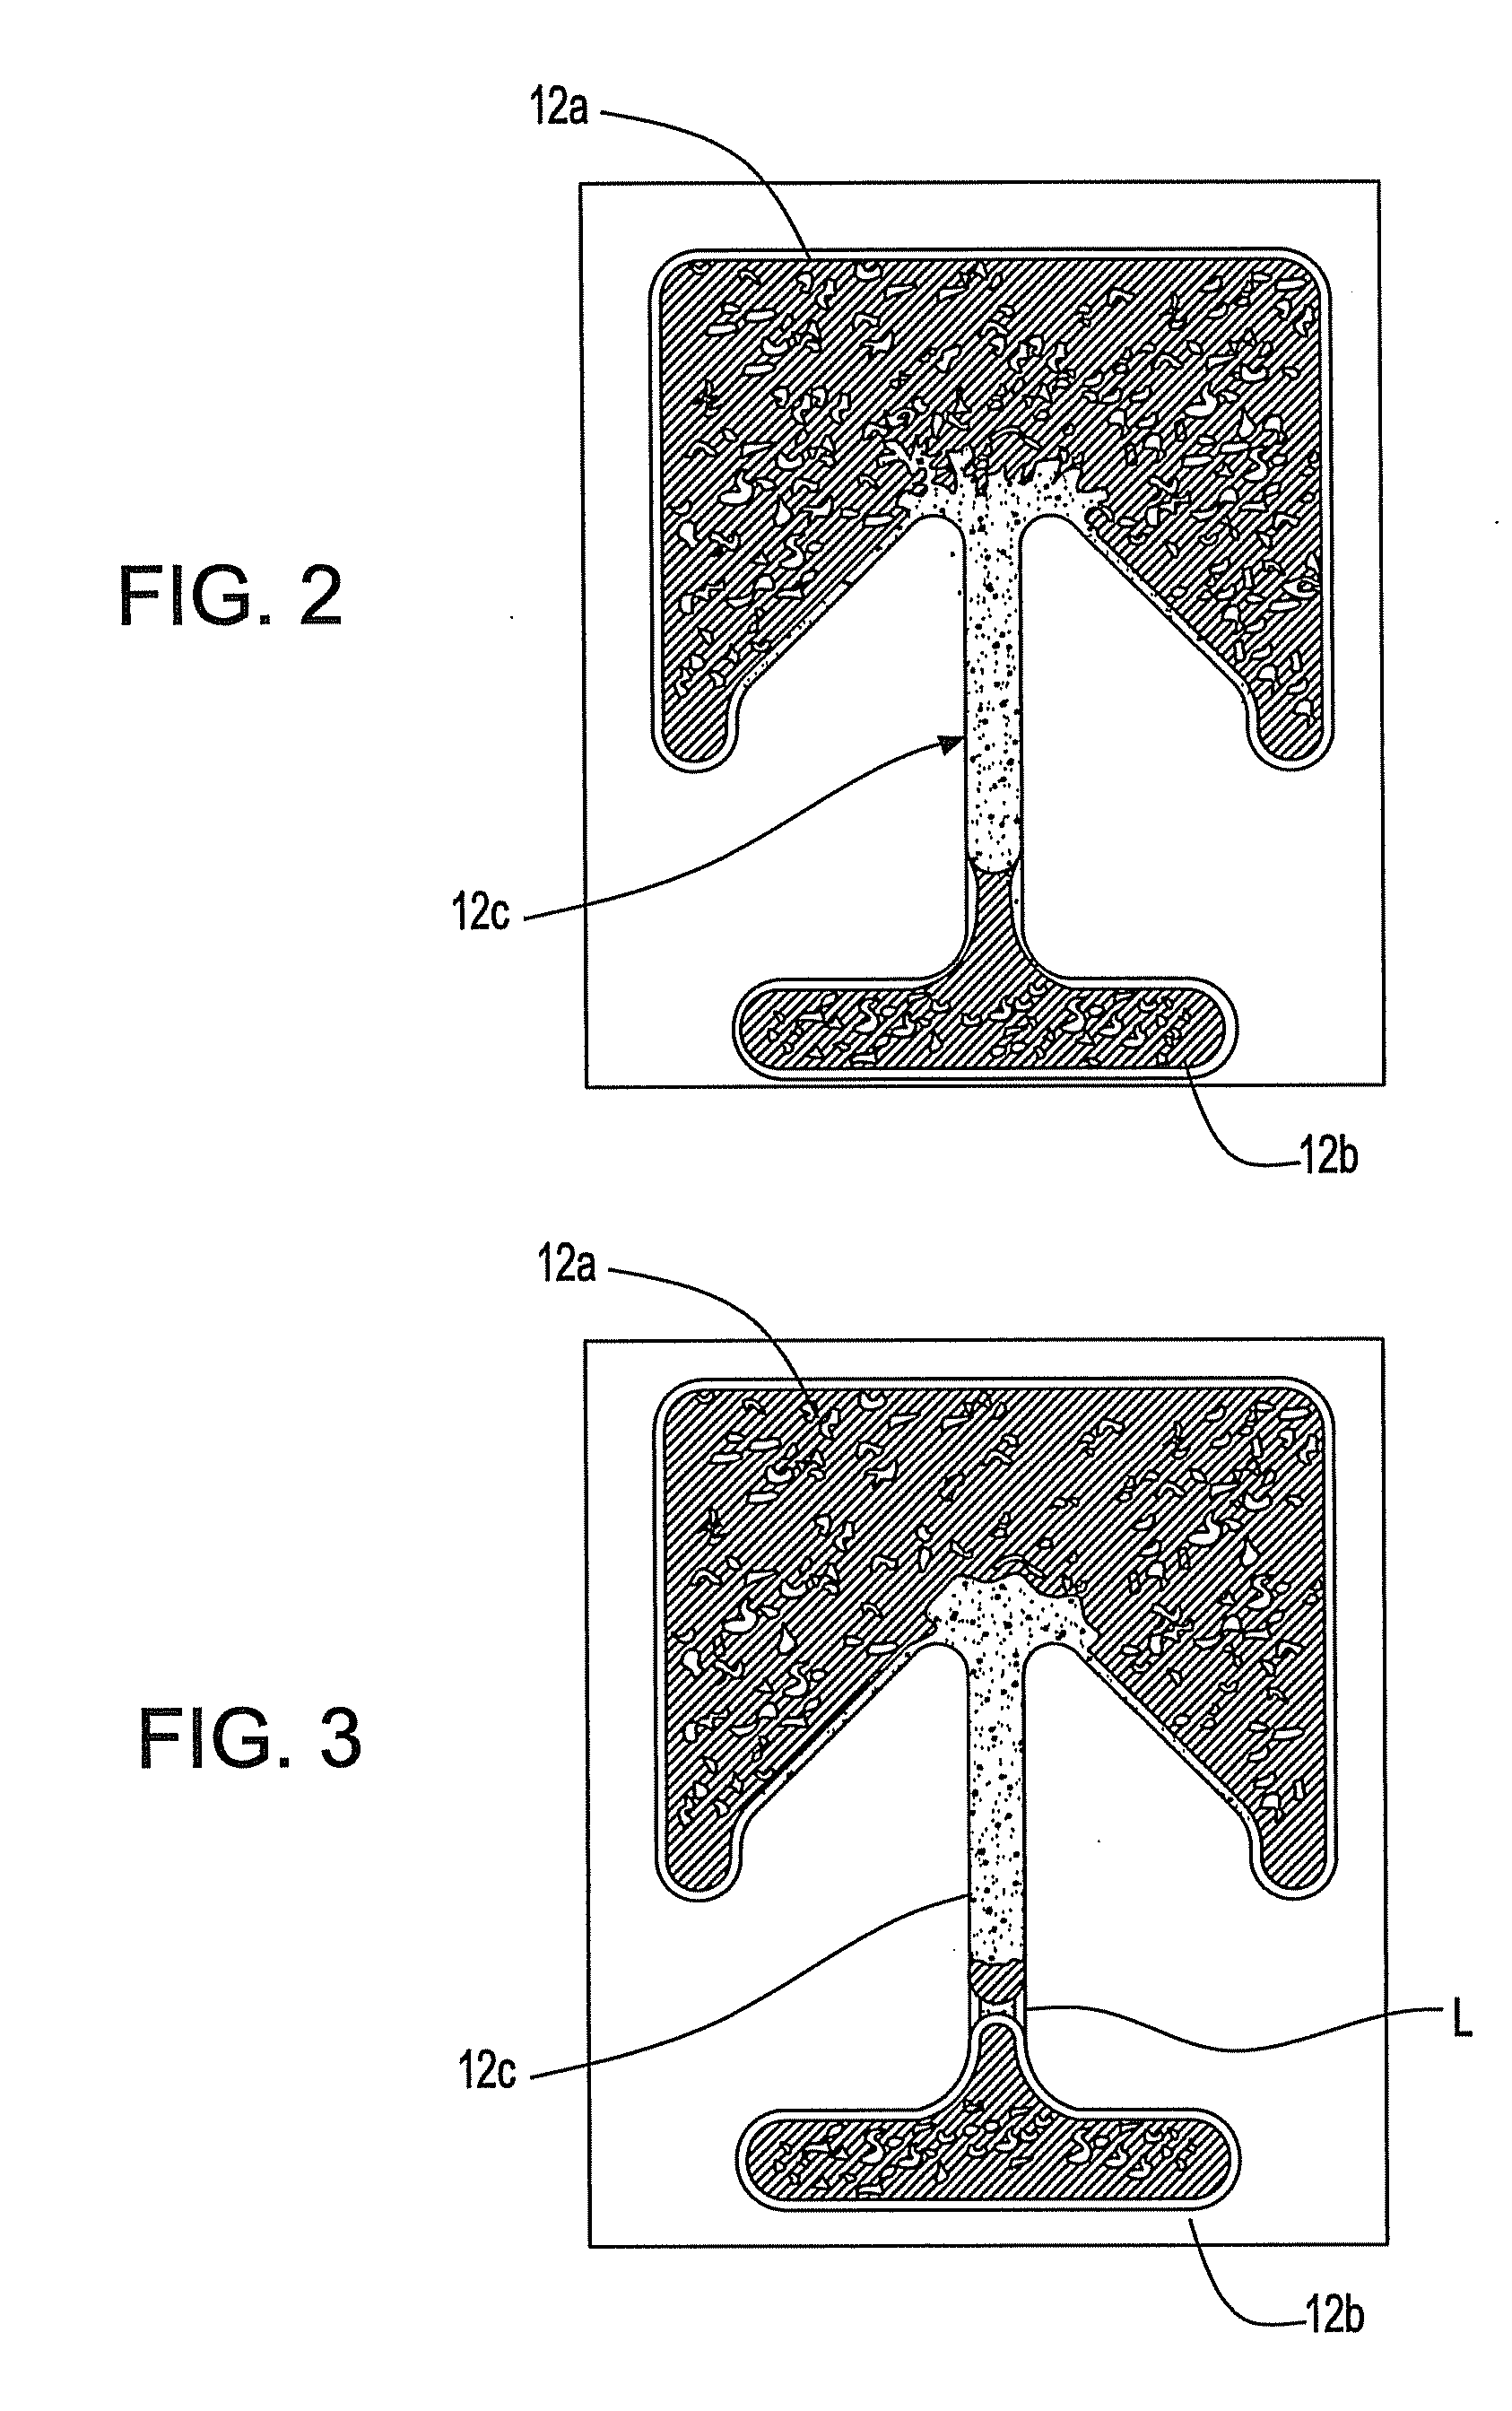 Programmable semiconductor device